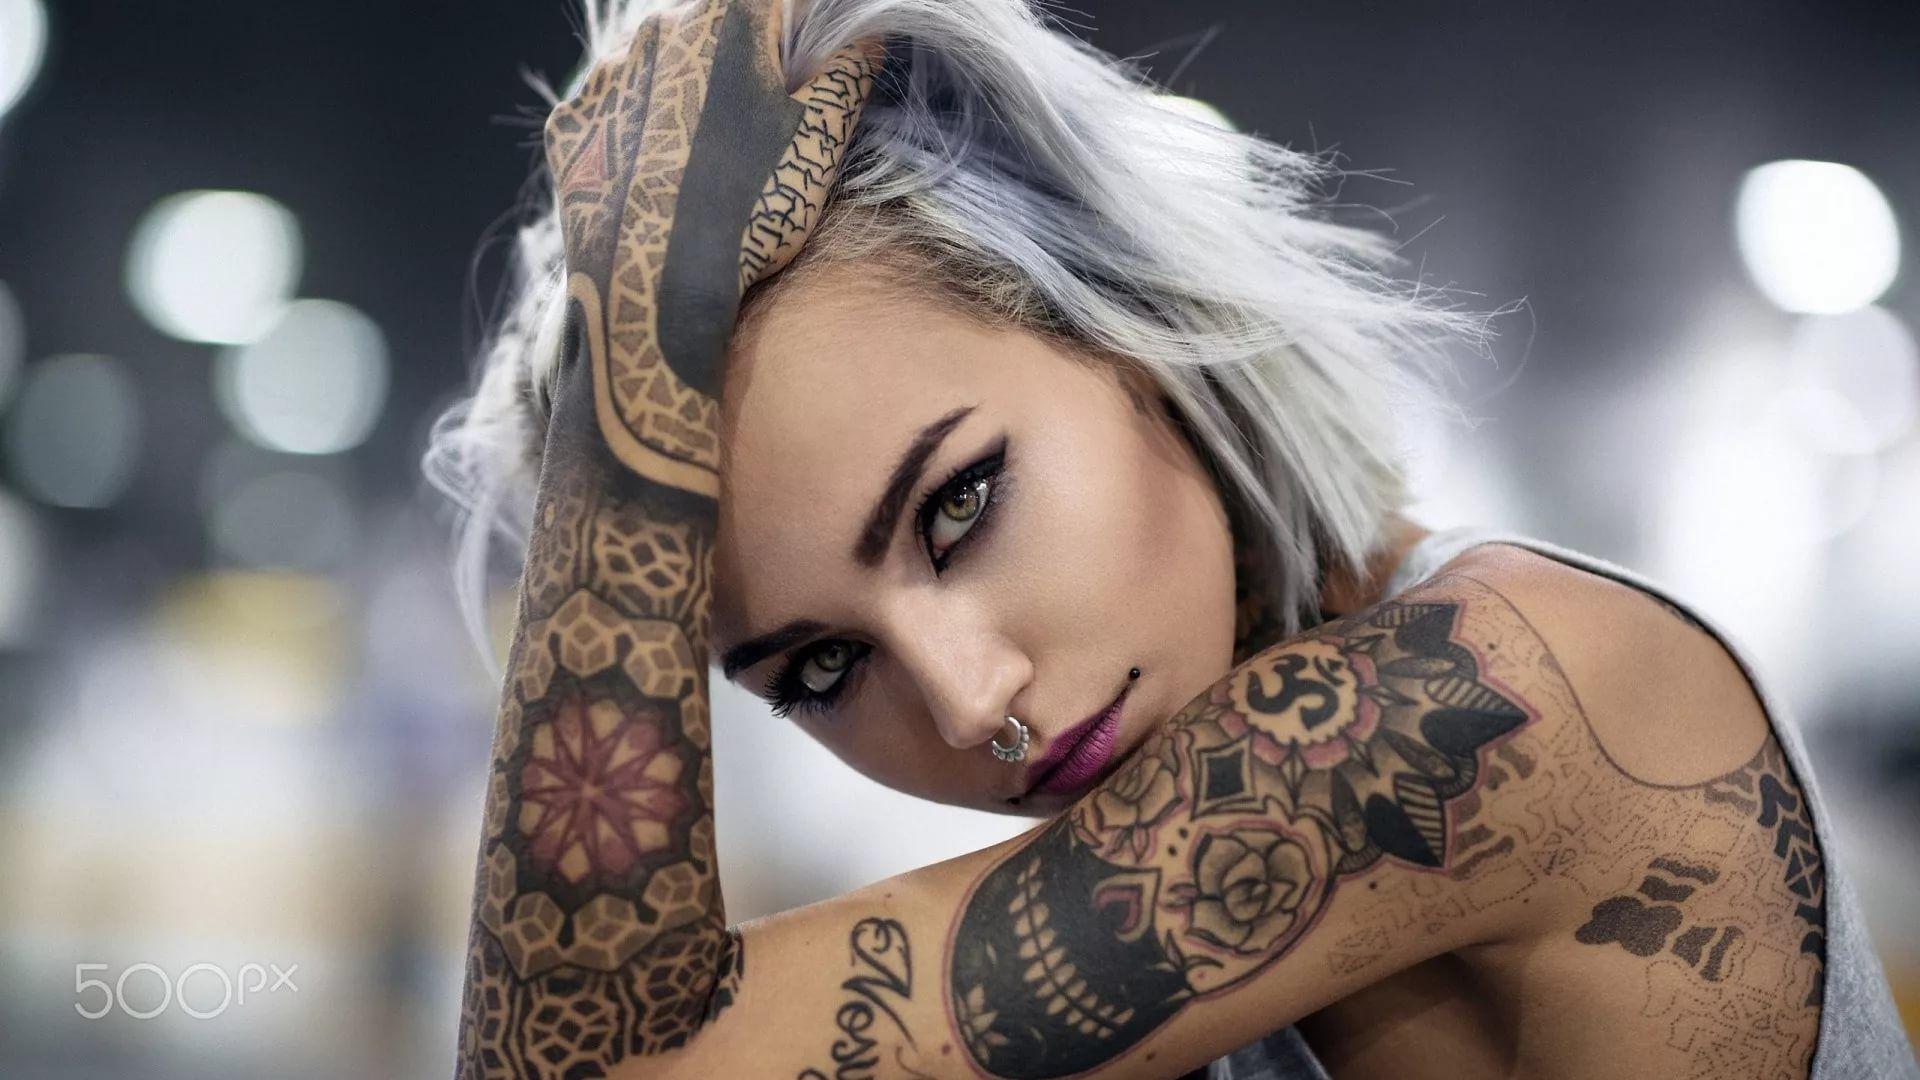 Download Tattoo wallpapers for mobile phone free Tattoo HD pictures